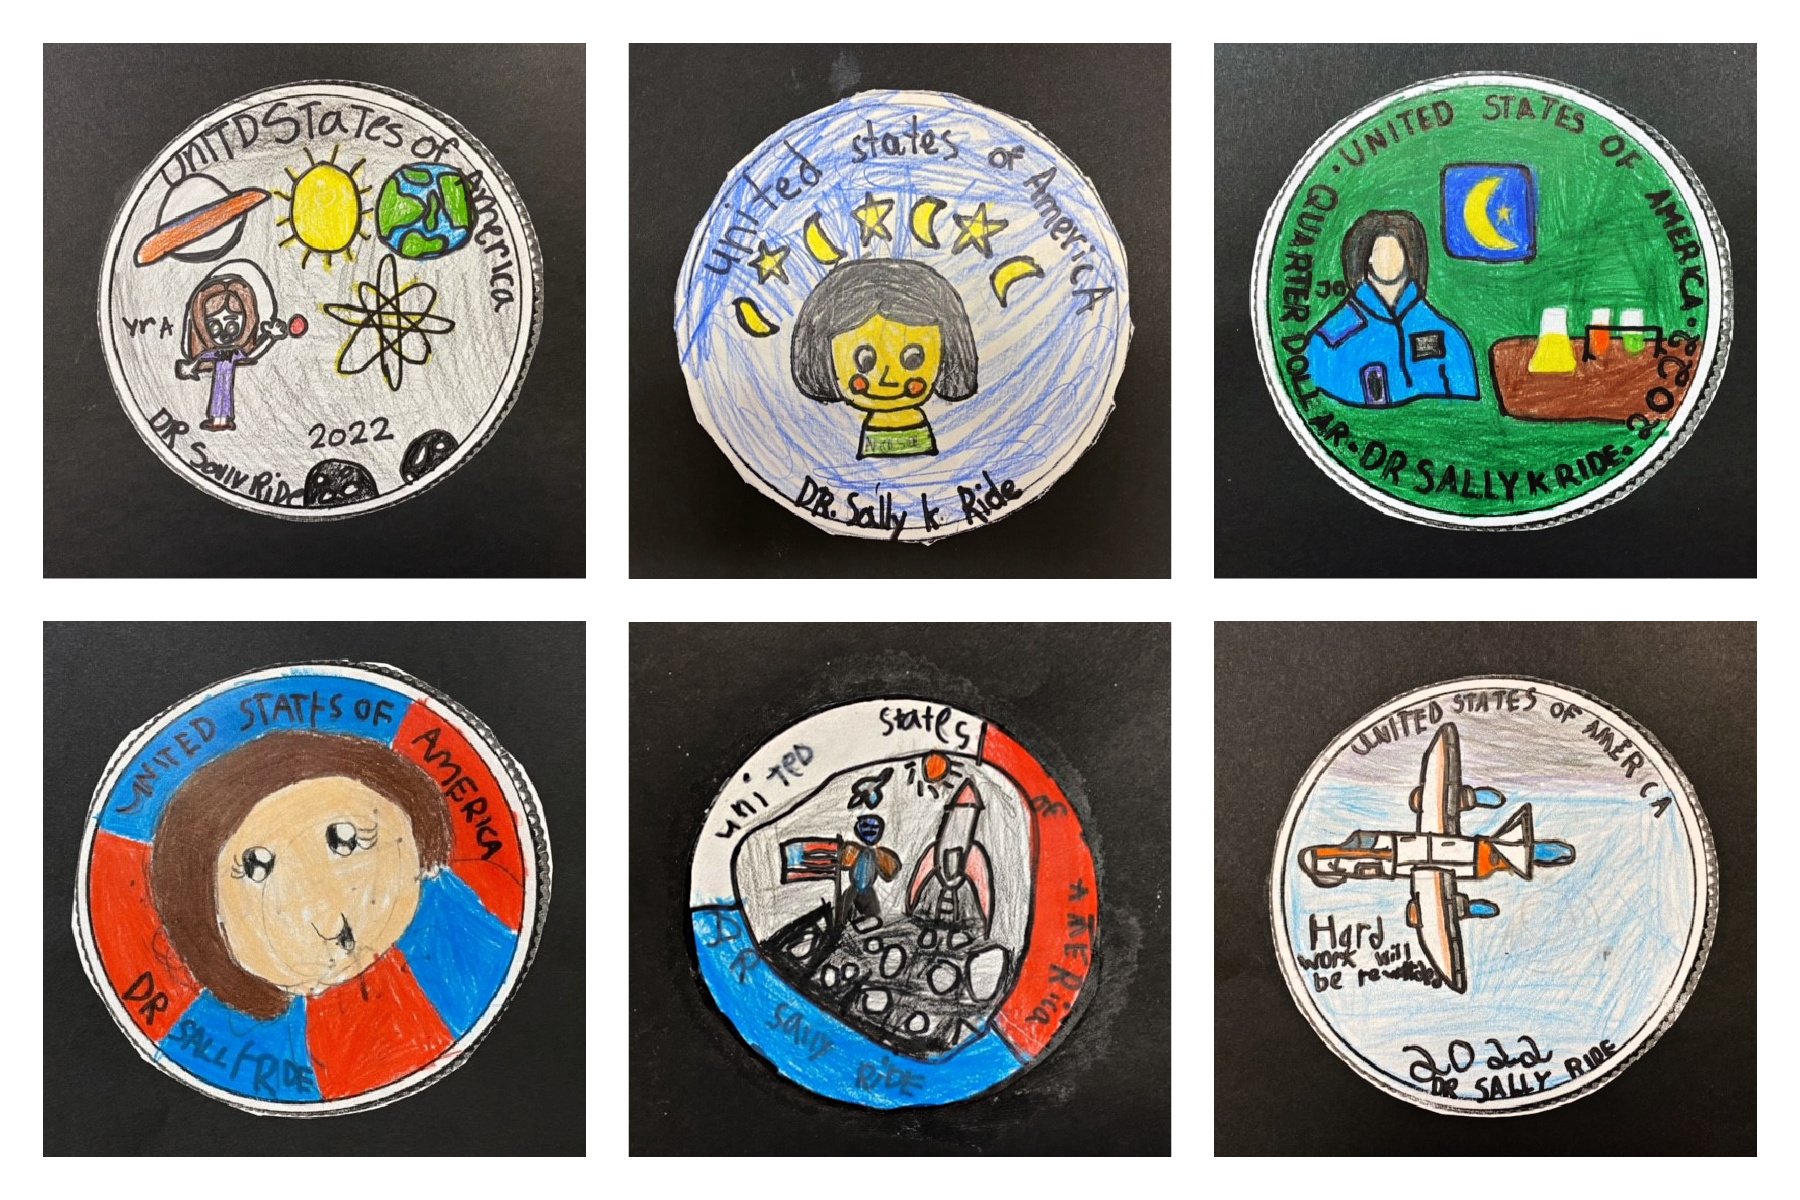 A collection of children's drawings depicting designs for their own Sally Ride quarters.